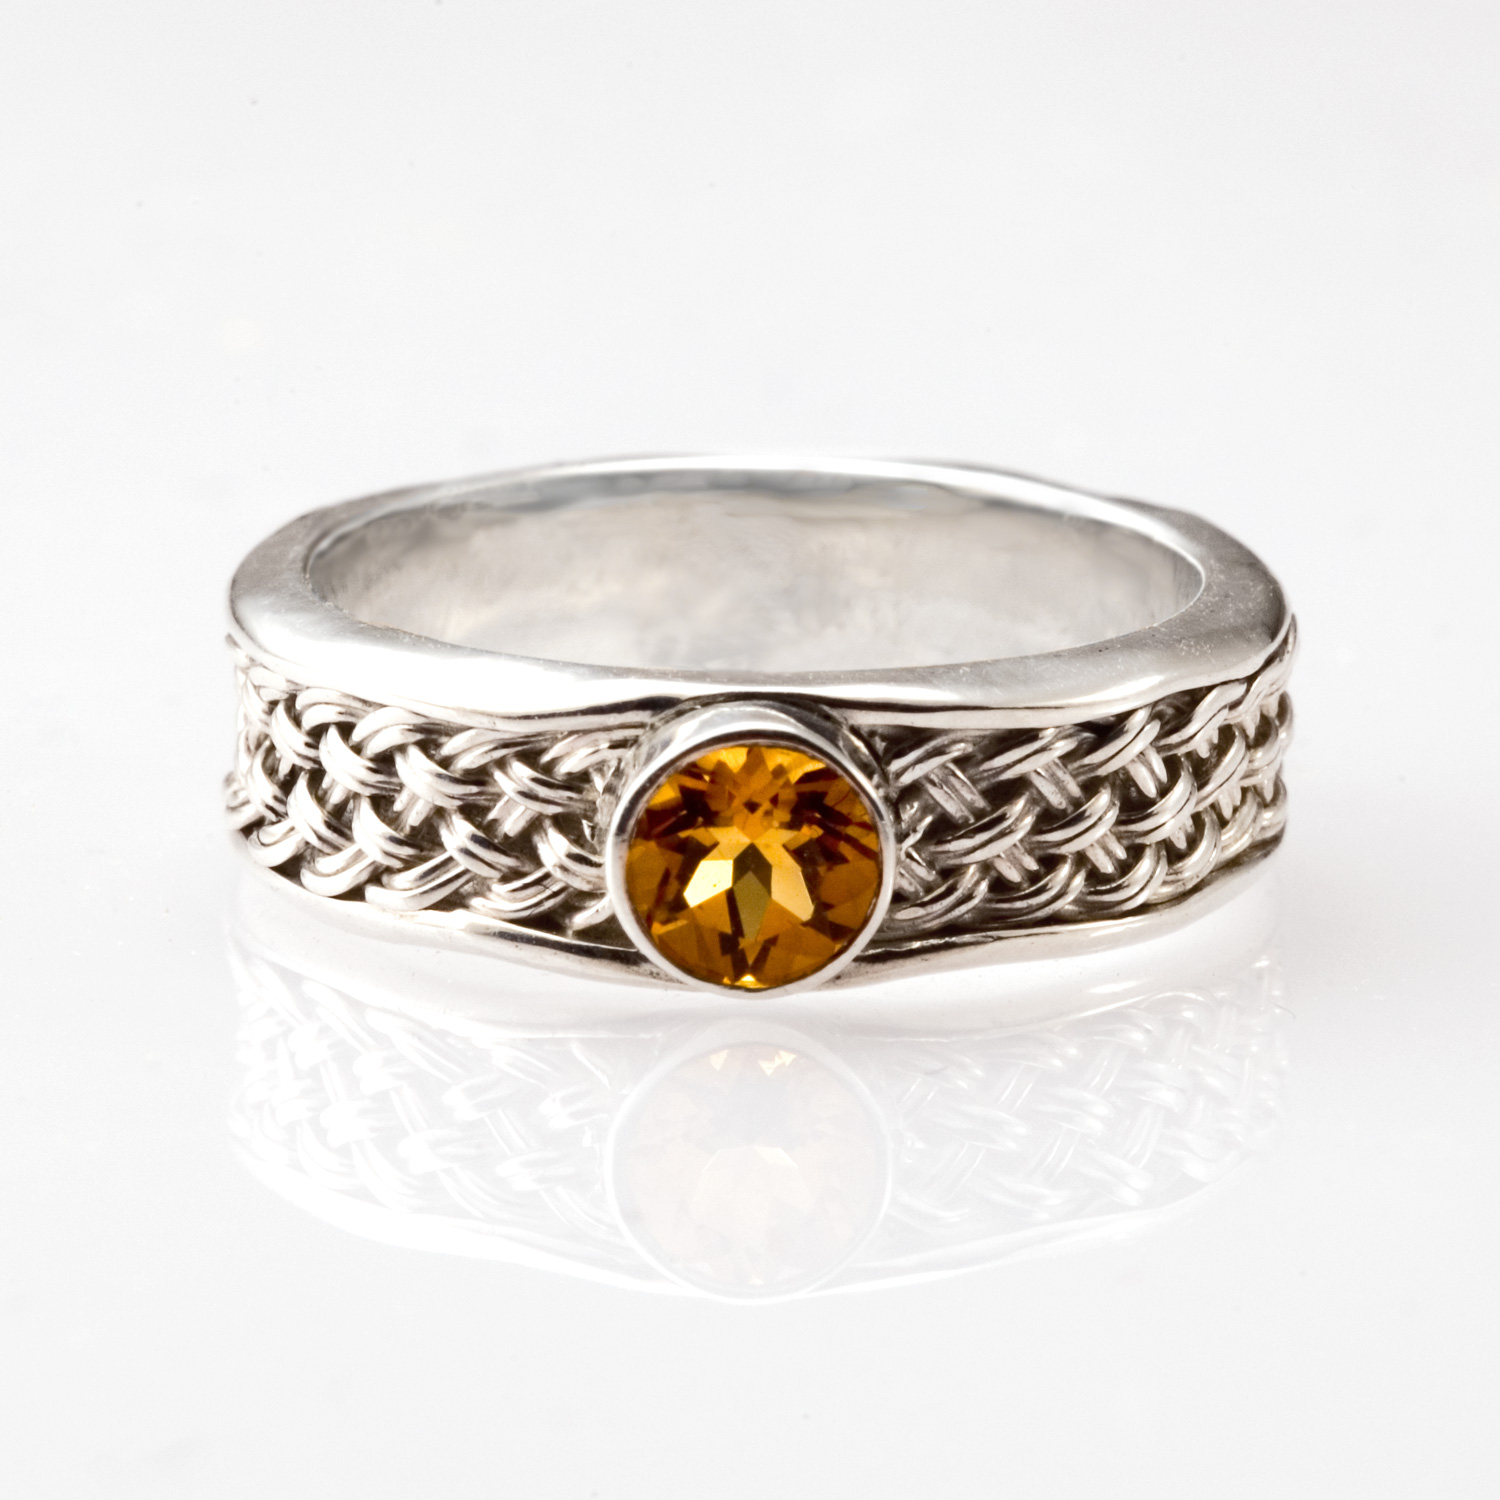 Citrine Inset Weave Ring in sterling silver by Tamberlaine